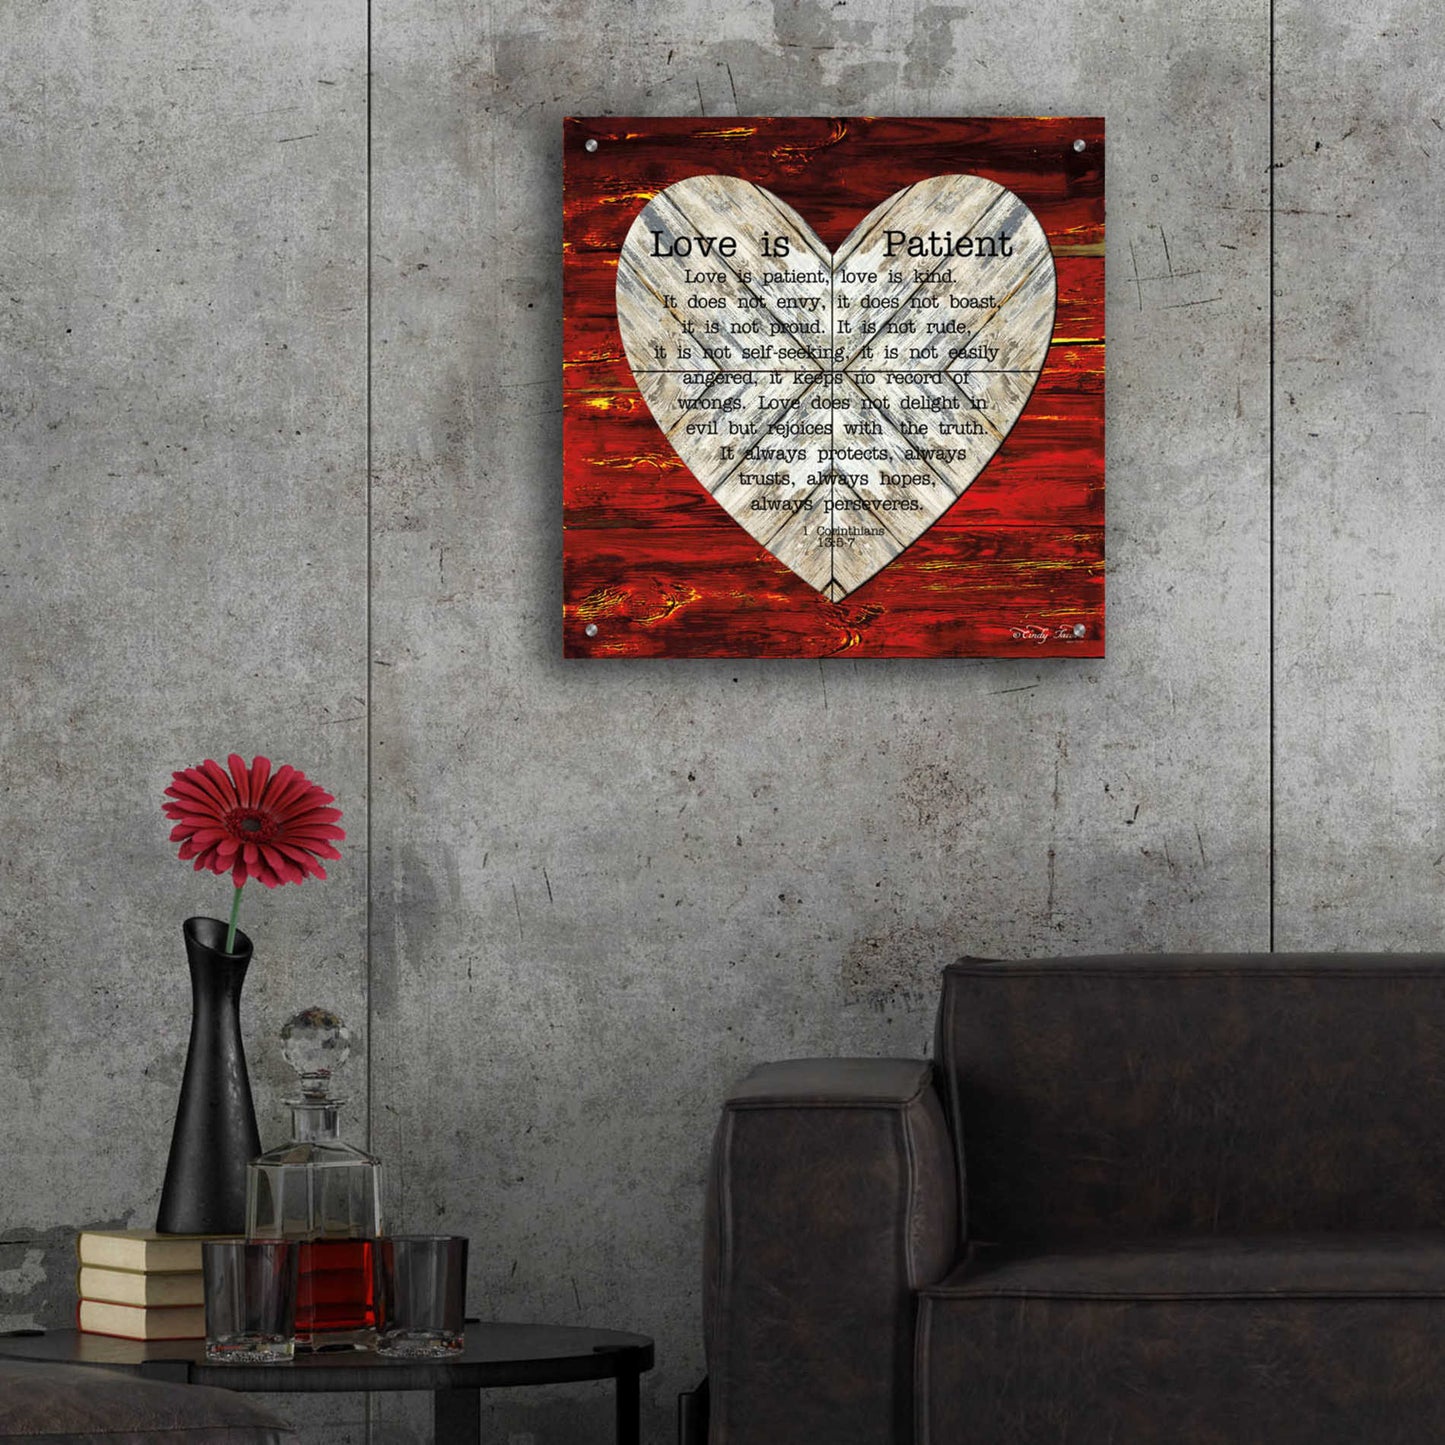 Epic Art 'Love is Patient' by Cindy Jacobs, Acrylic Glass Wall Art,24x24